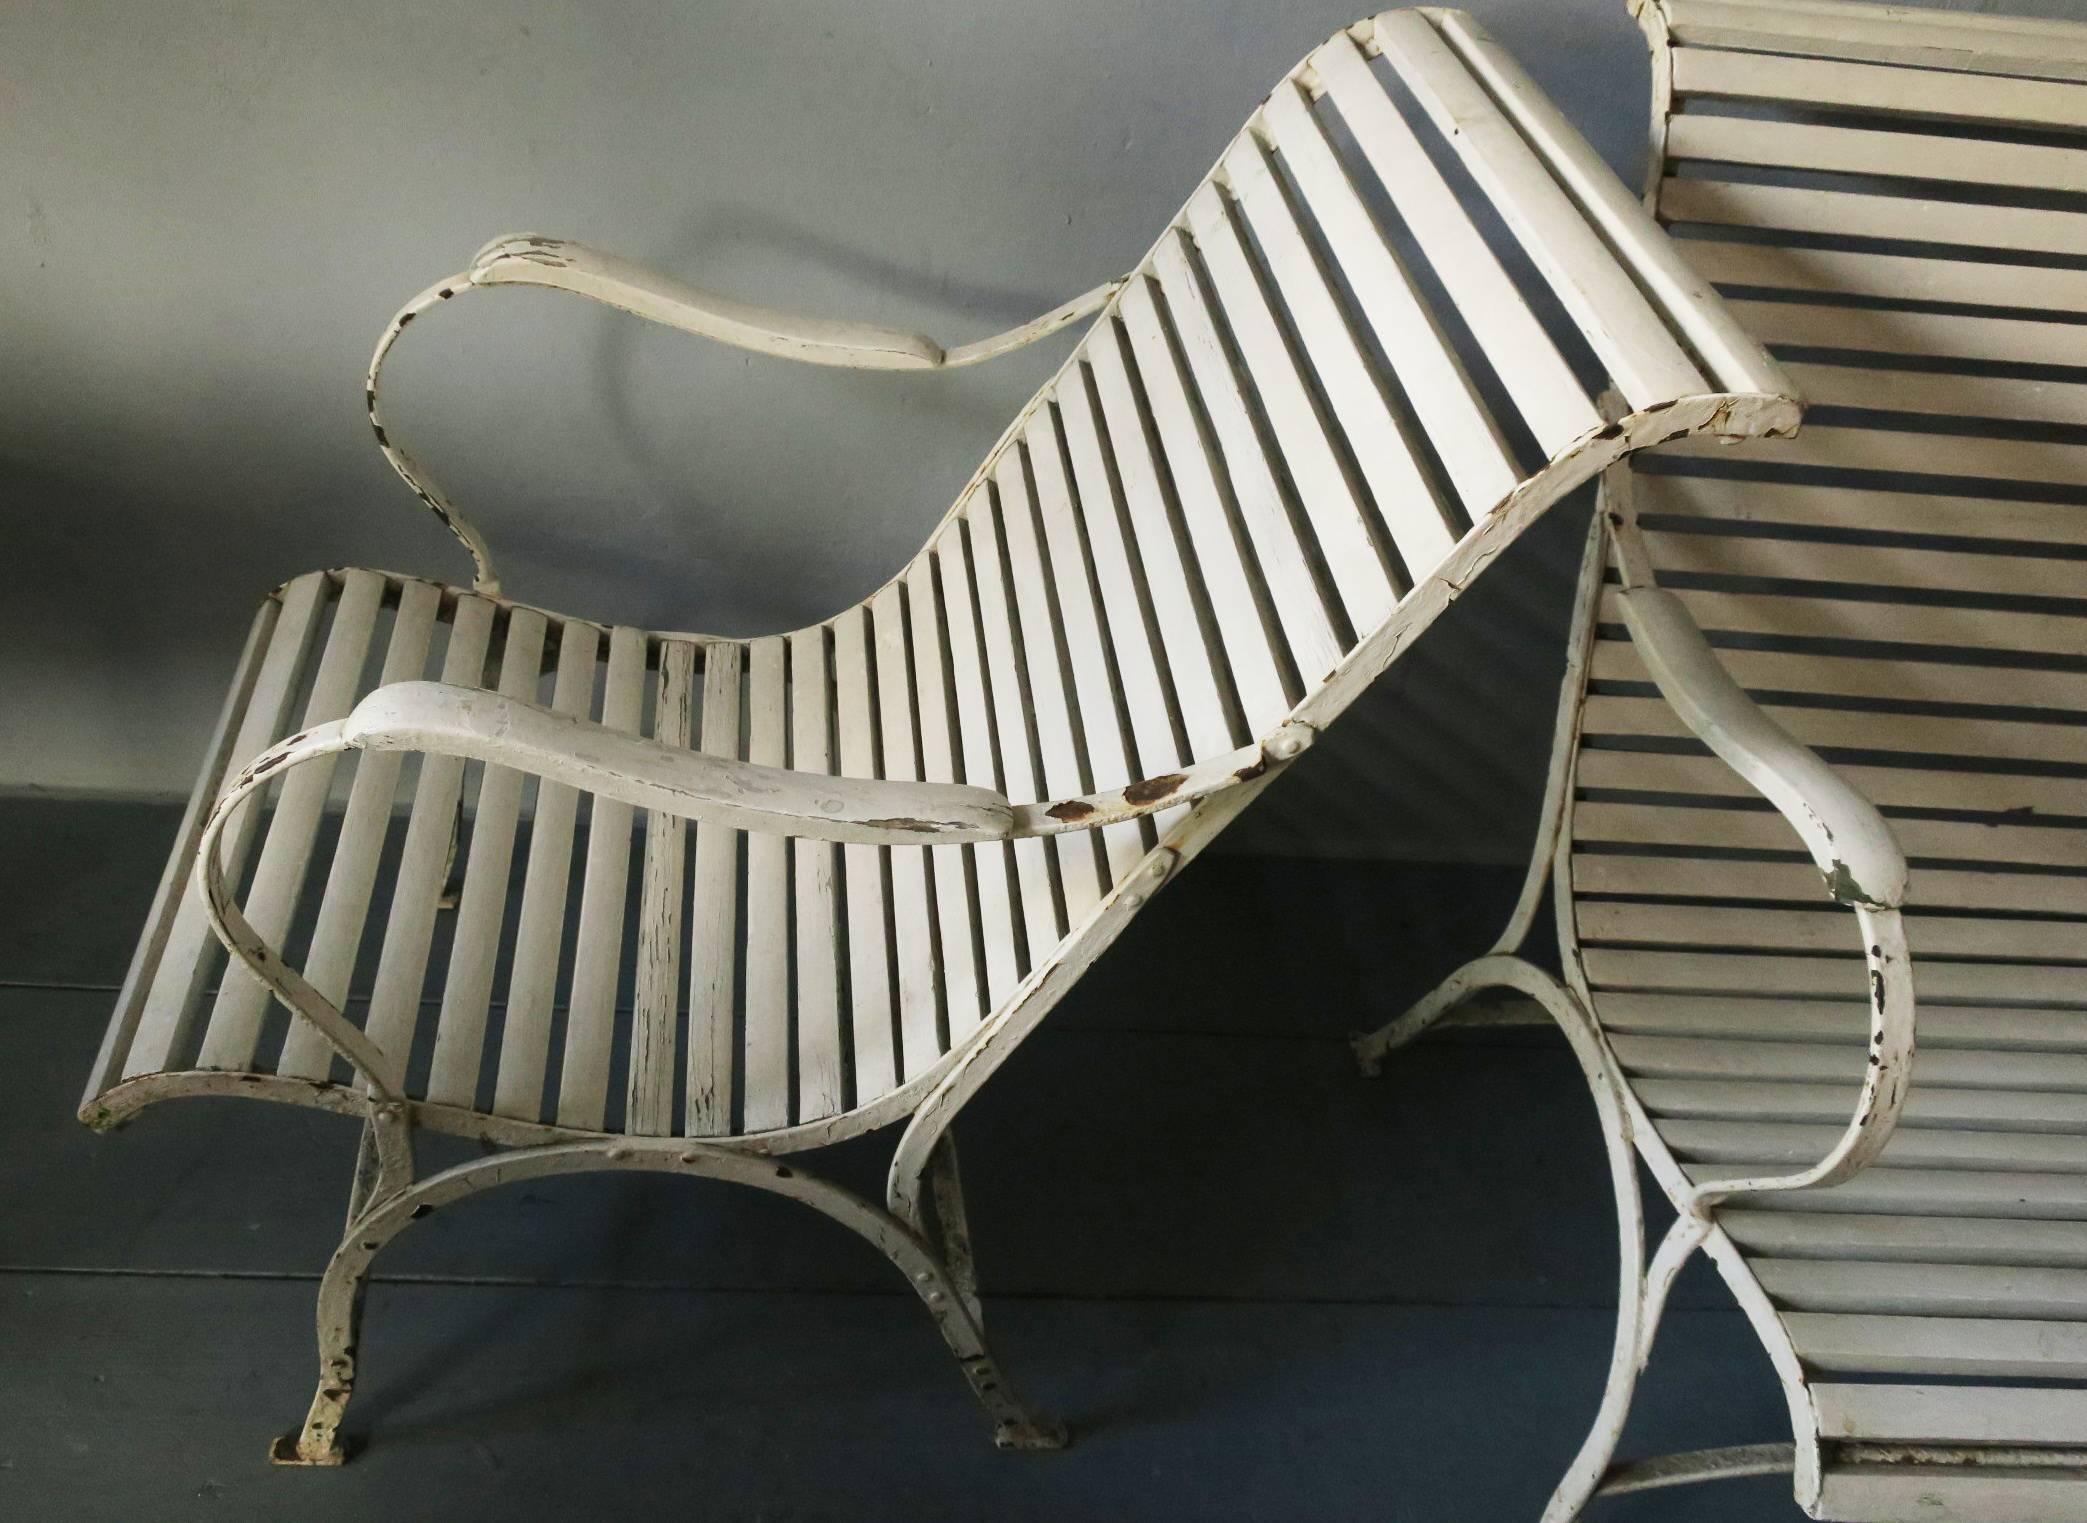 Pair of painted iron patio or garden lounge chairs, early 20th century.

The chairs have an iron frame with wood slats for the seat and back and wood armrests.